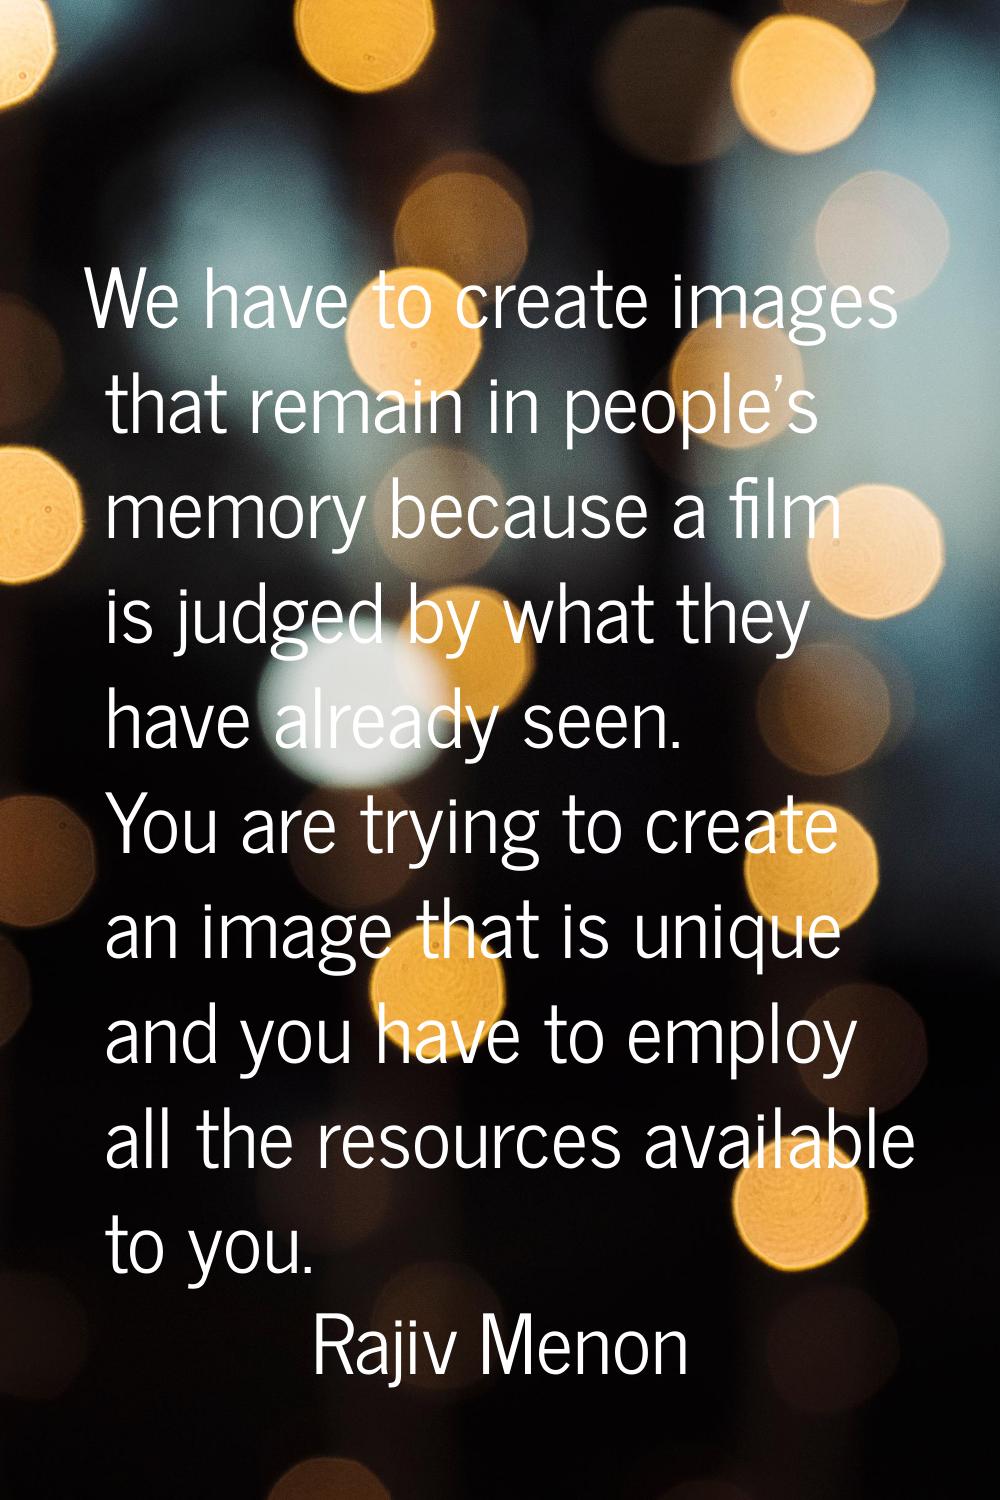 We have to create images that remain in people's memory because a film is judged by what they have 